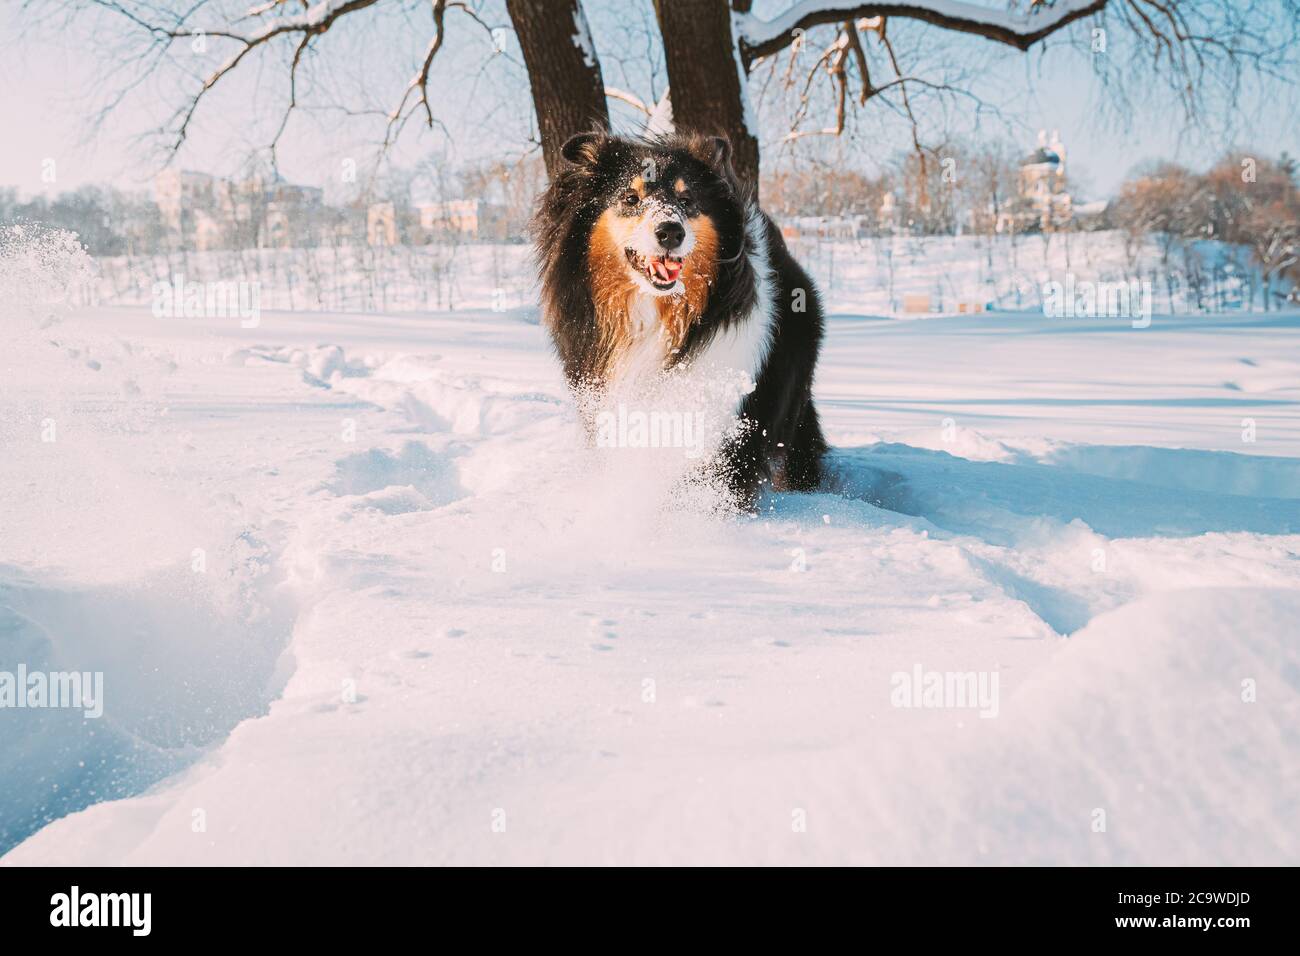 Funny Young Shetland Sheepdog, Sheltie, Collie Fast Running Outdoor in Snowy Park. Animale domestico divertente nel parco invernale Foto Stock